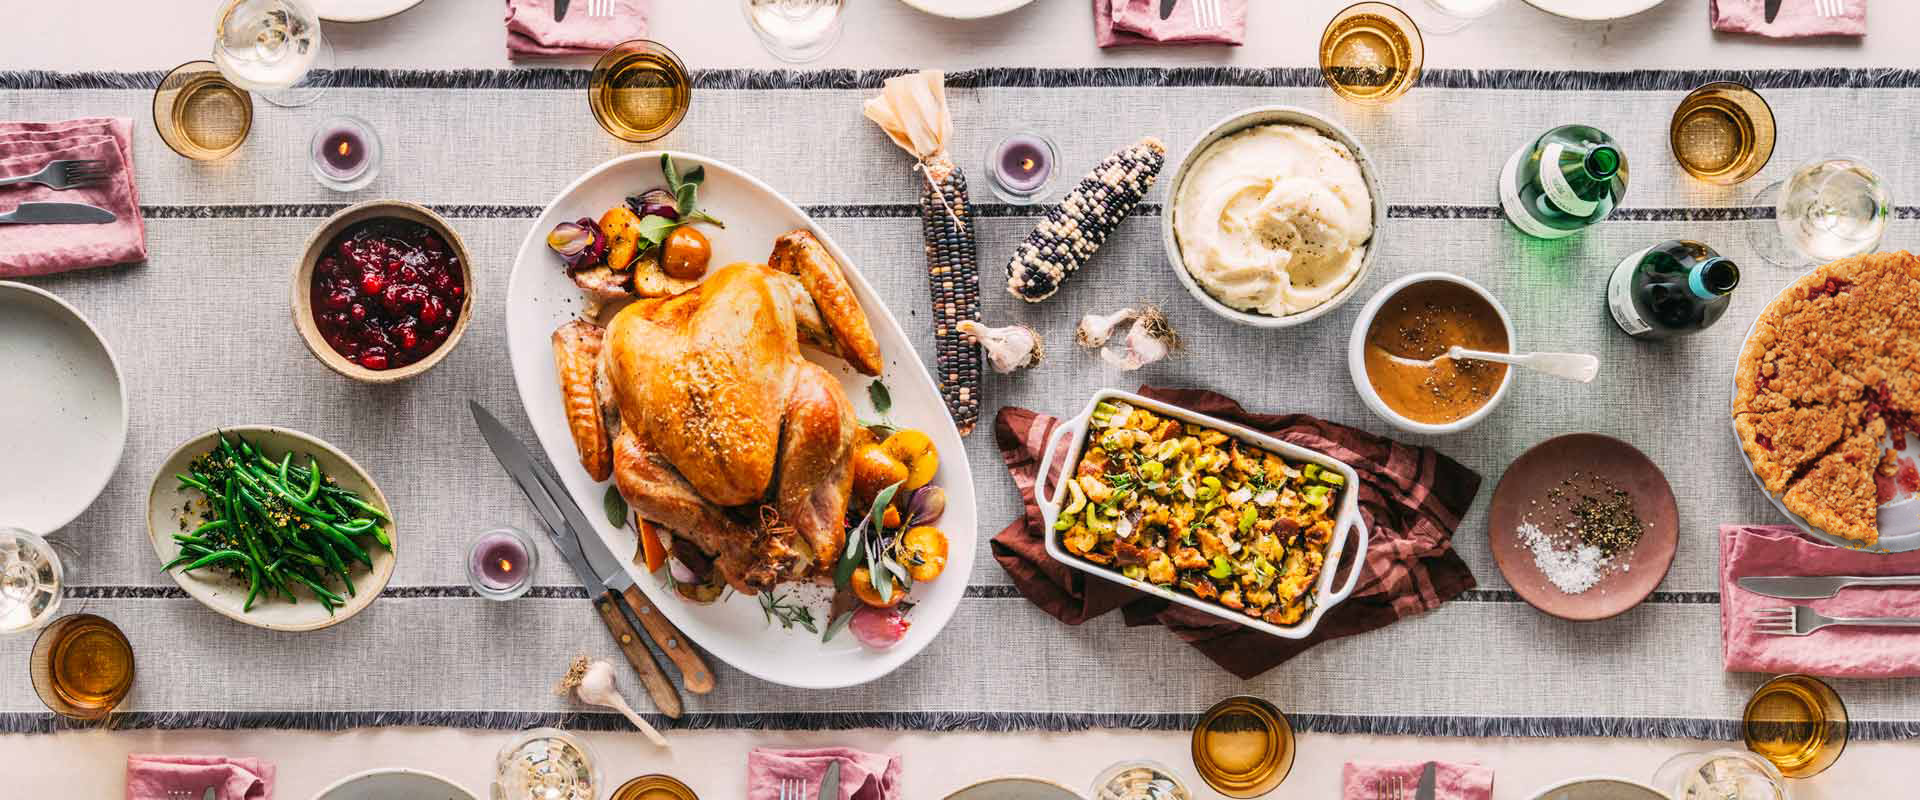 Whole Foods Order Thanksgiving Turkey
 Shop Our Holiday Table